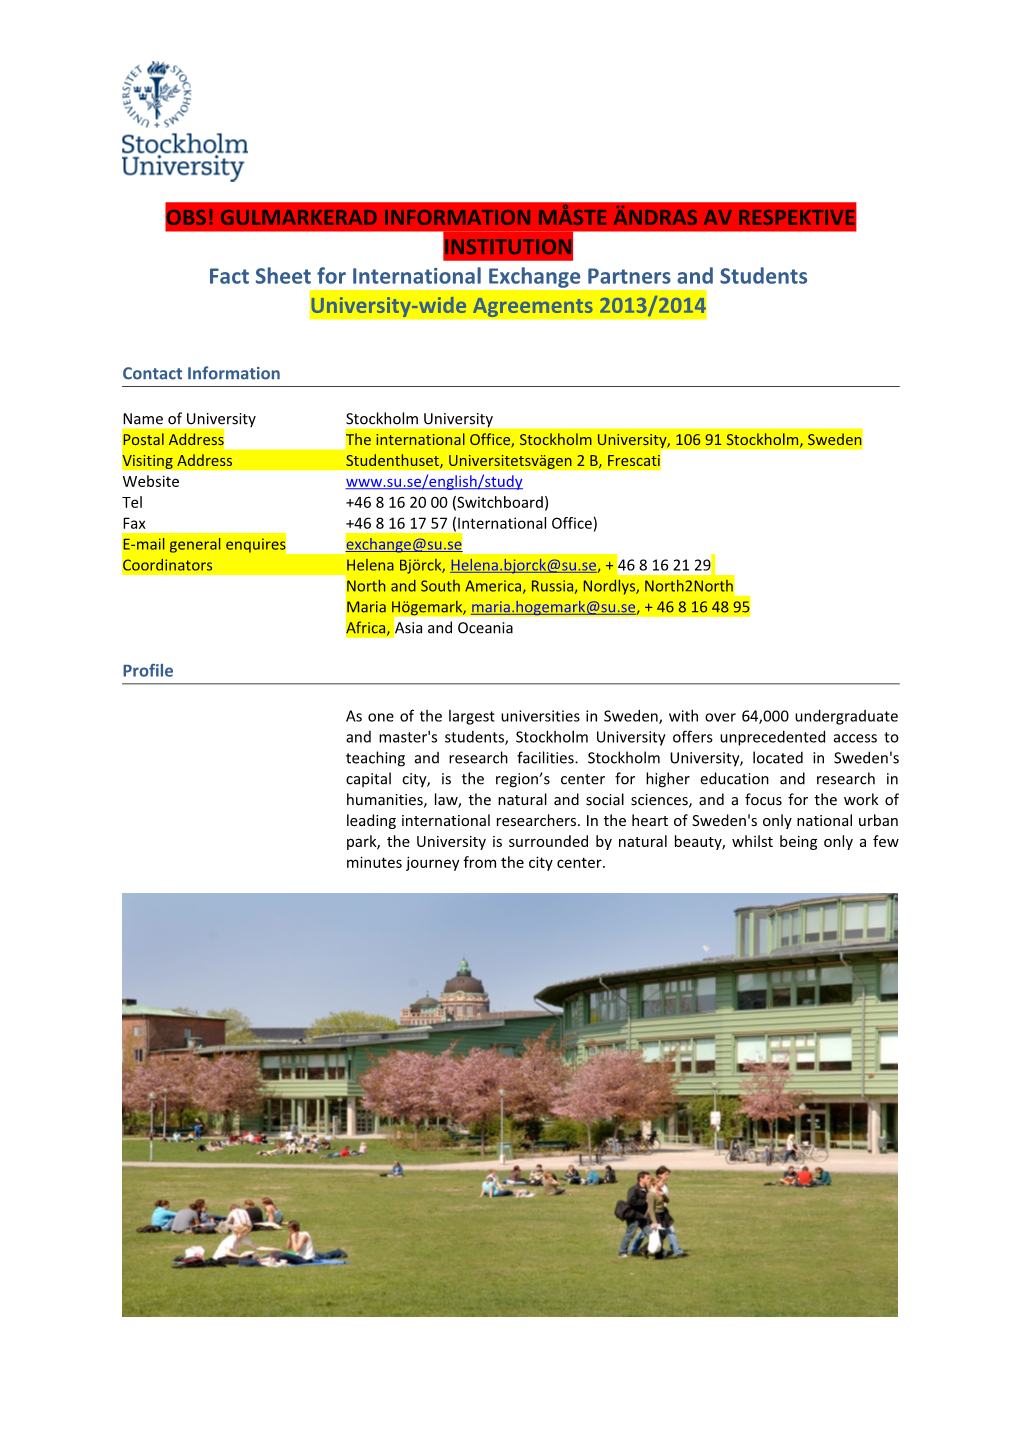 Factsheet for International Exchange Partners and Students